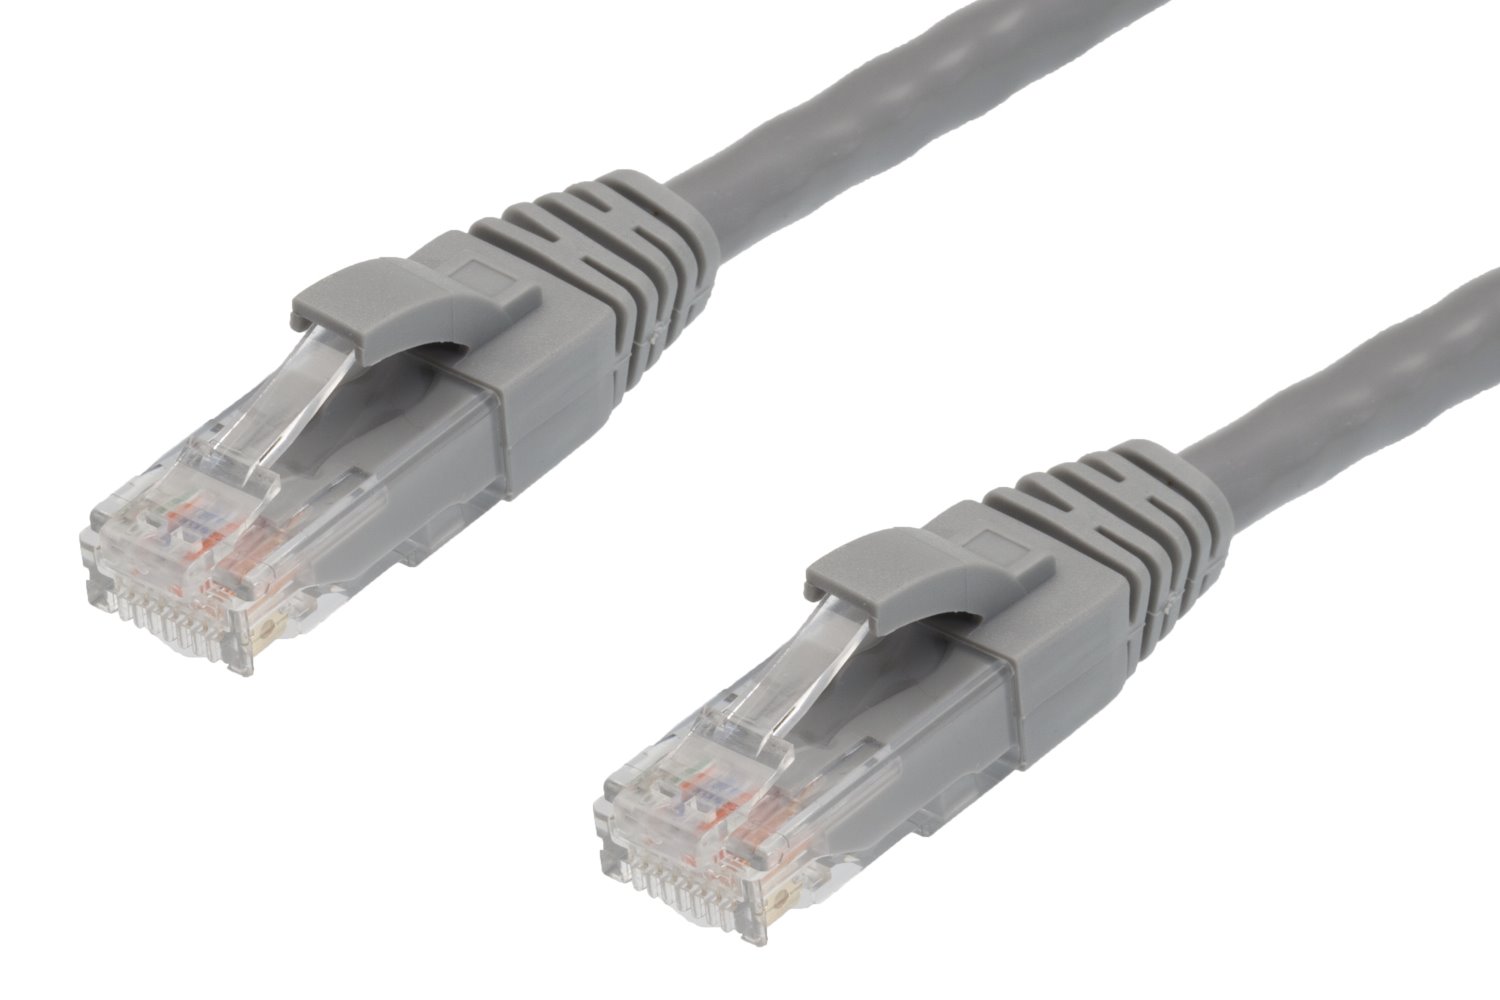 4Cabling 1.5M RJ45 Cat6 Ethernet Cable. Grey